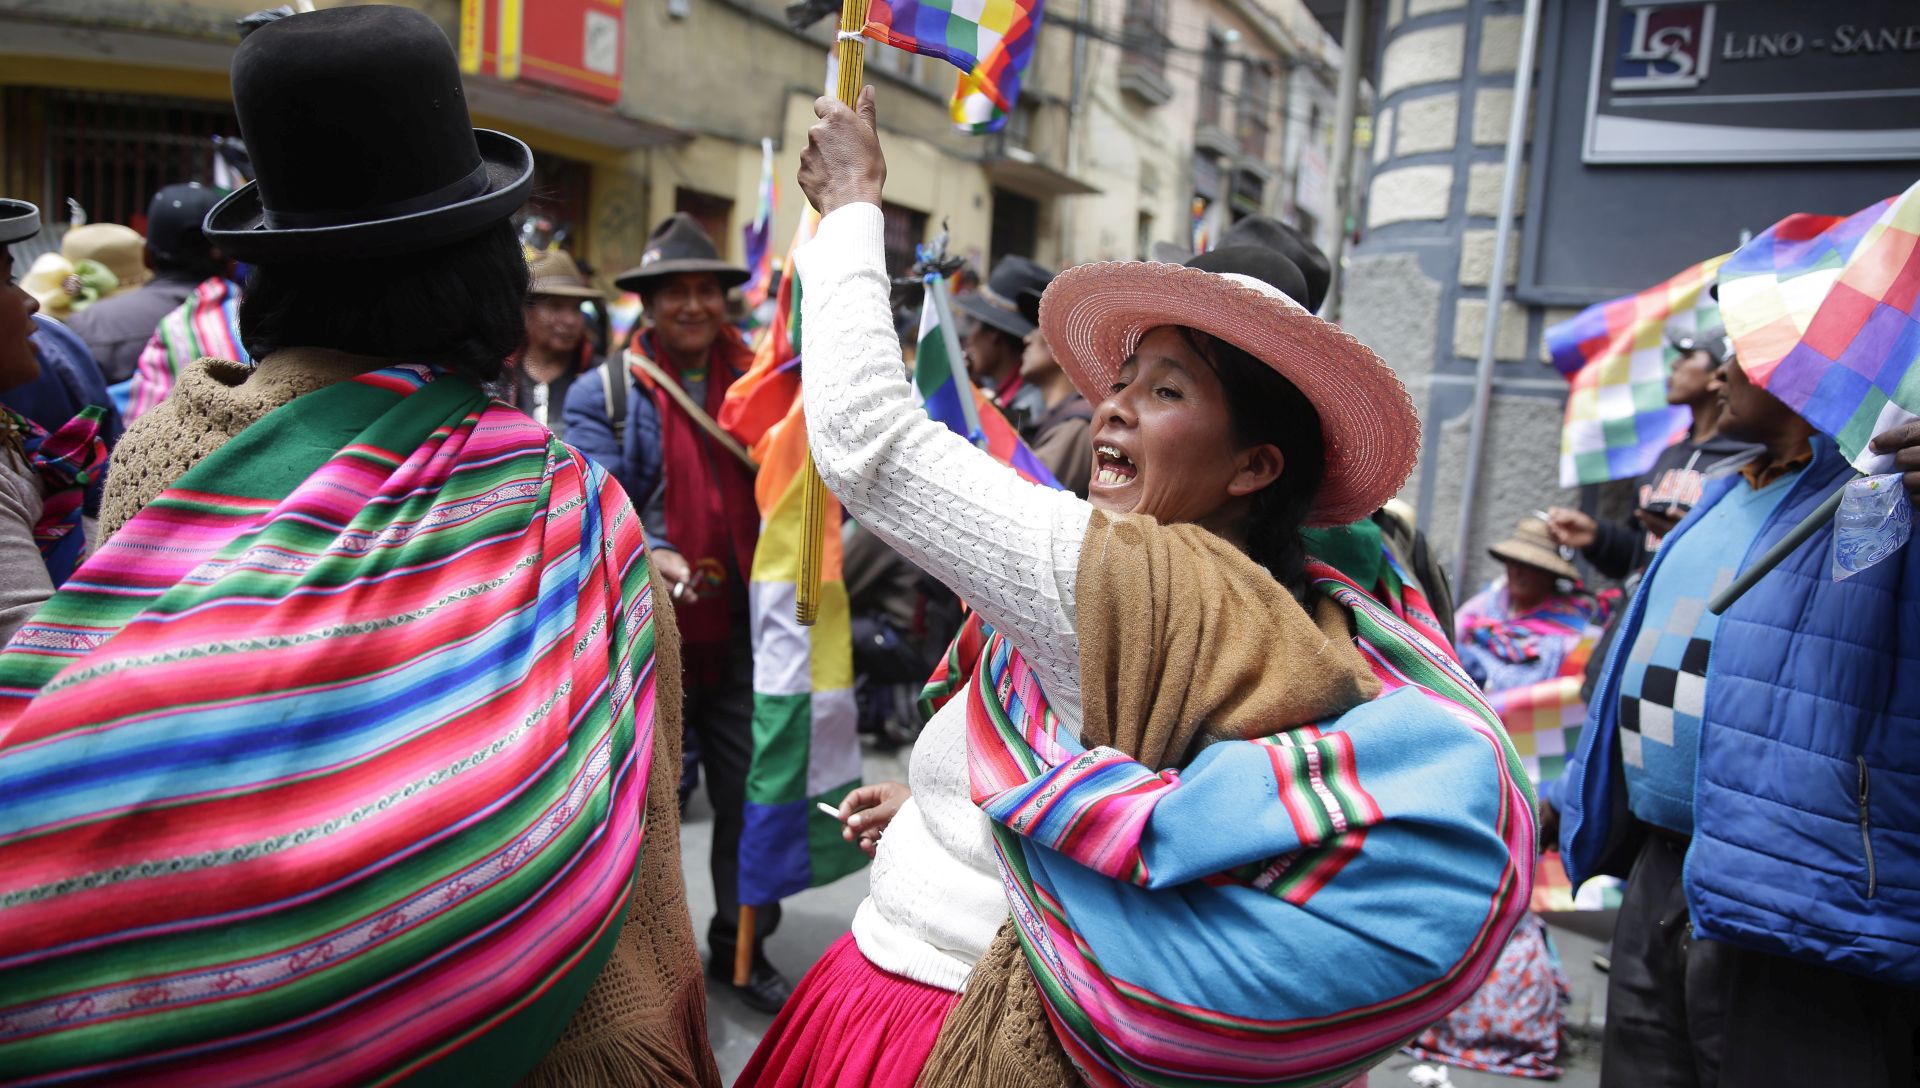 epa08007126 Bolivians participate in a rally in favor of Evo Morales, in La Paz, Bolivia, 18 November 2019. Bolivia has plunged into a crisis after the contested elections result of 20 October. One week after Morales' resignation on 10 November, his supporters are protesting against the interim government of Jeanine Anez.  EPA/RODRIGO SURA